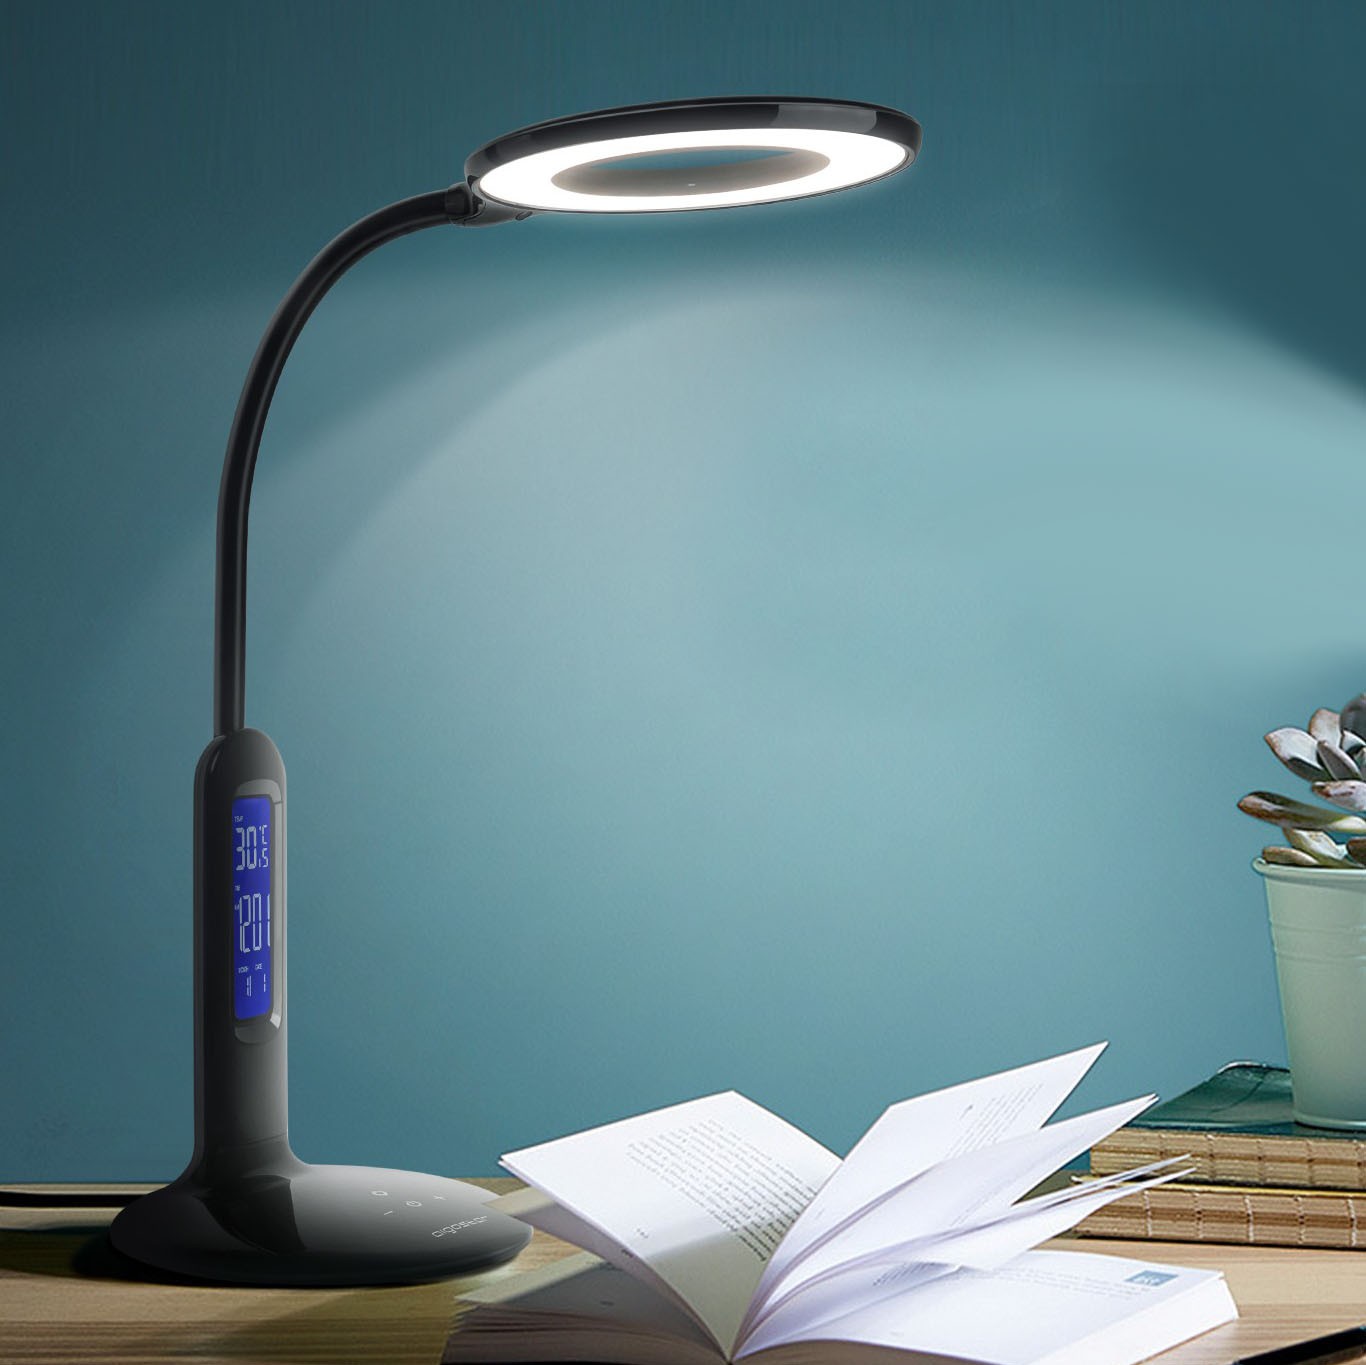 31,95 € Free Shipping | Desk lamp Aigostar 7W 28×16 cm. Dimmable LED table lamp Polycarbonate. Black Color